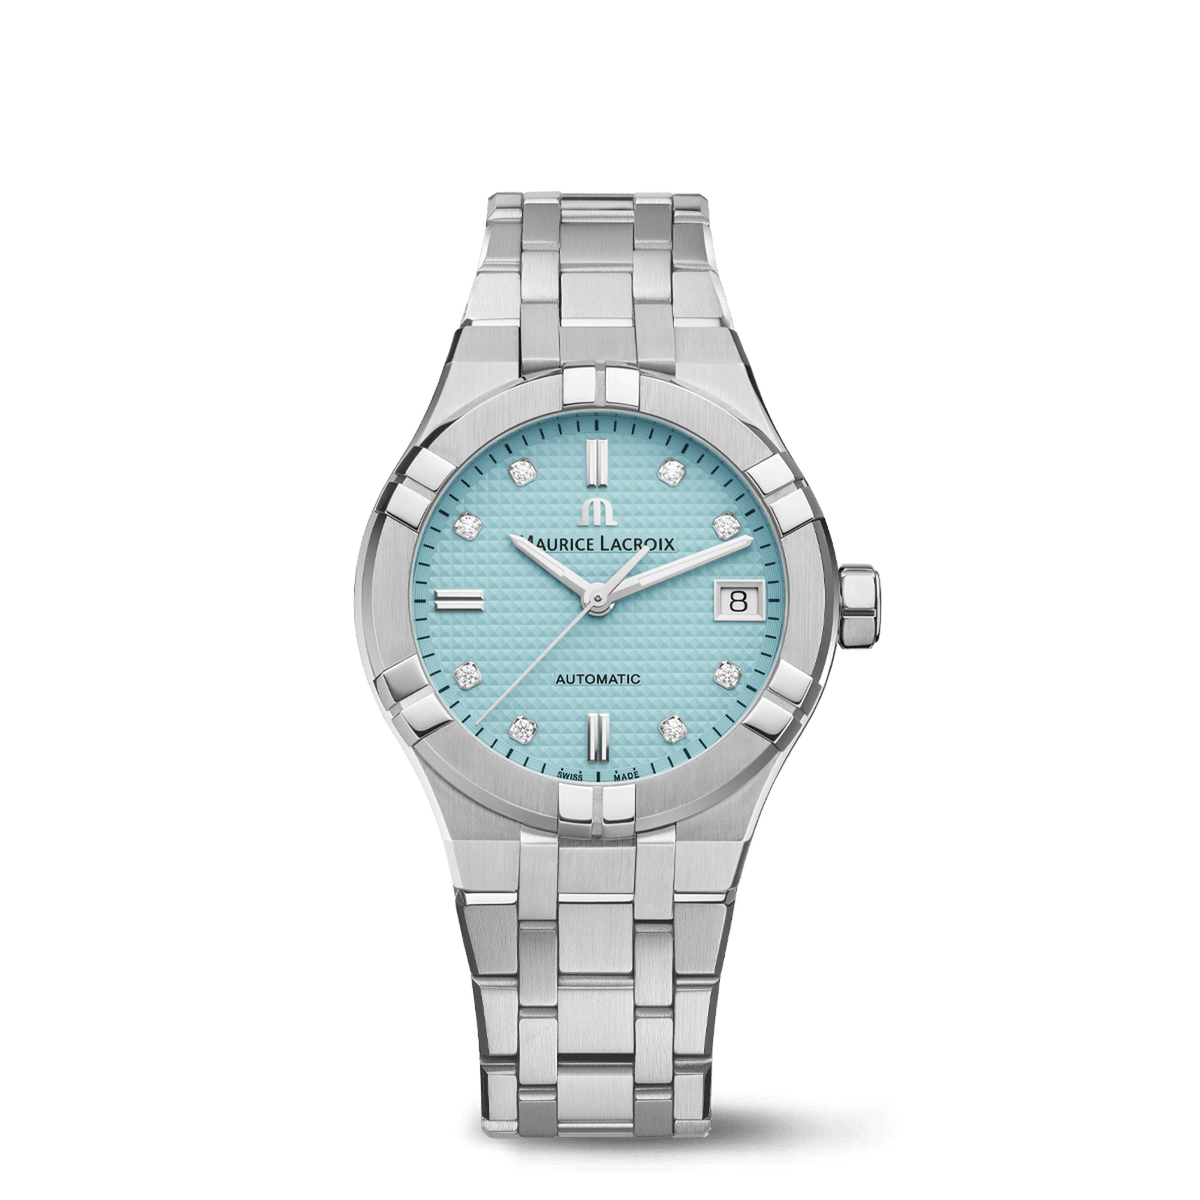 Maurice Lacroix AIKON 35mm Turquoise Limited Summer Edition Women's Watch AI6006-SS00F-451-C